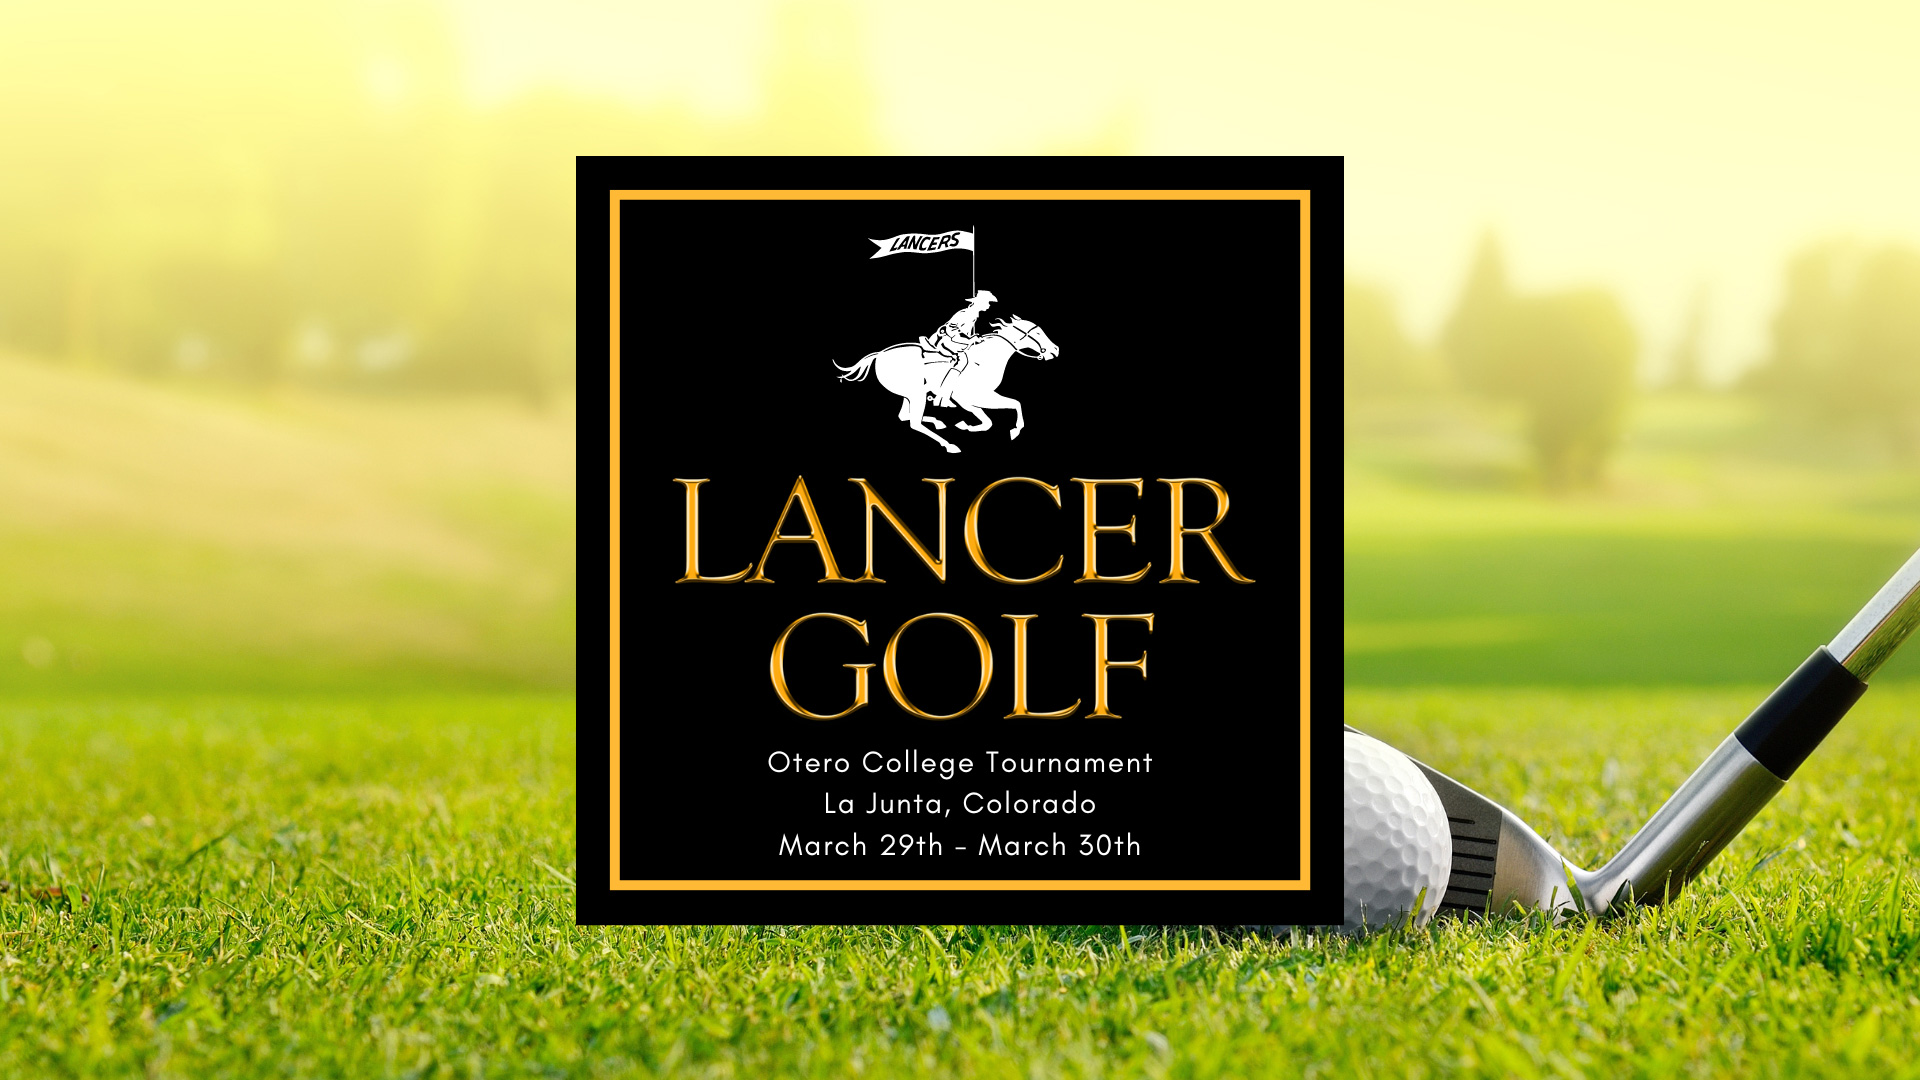 Eastern Wyoming College - Lancer Golf Results at Otero College Tournament